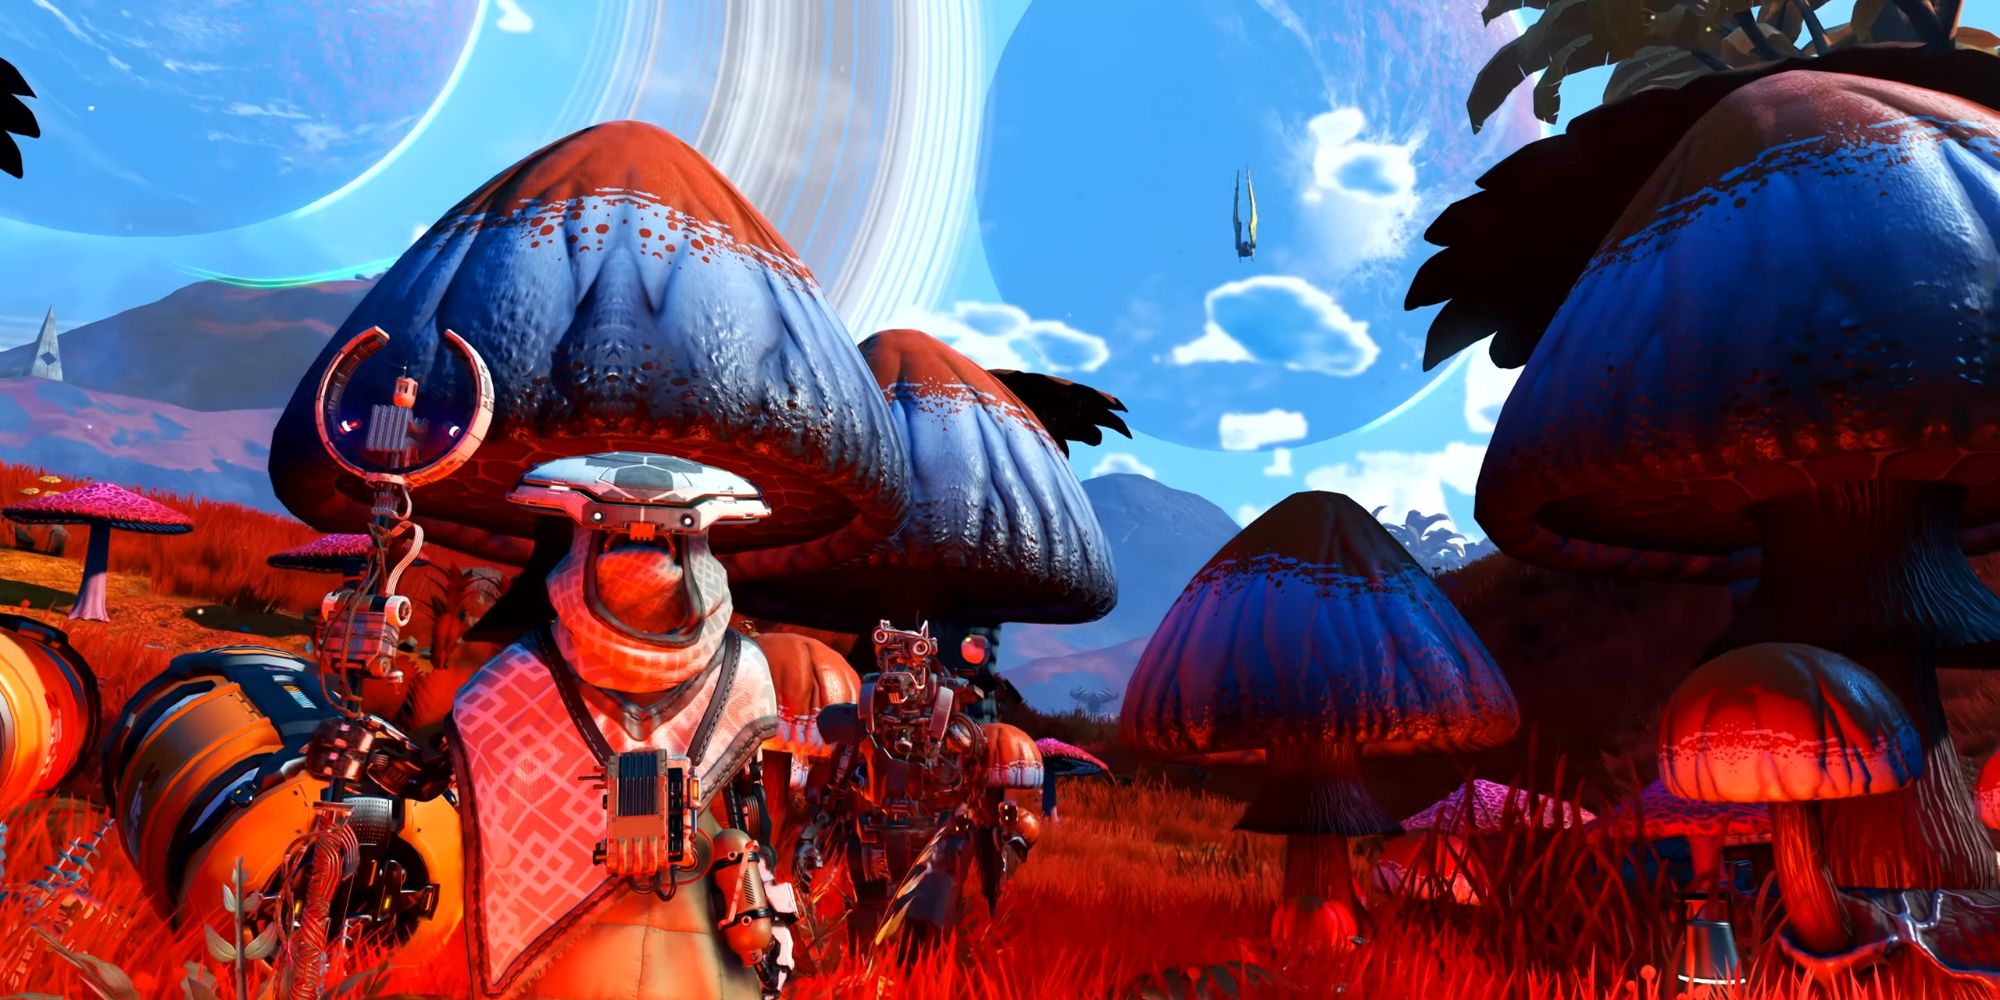 A character in No Man's Sky facing the camera with a staff.